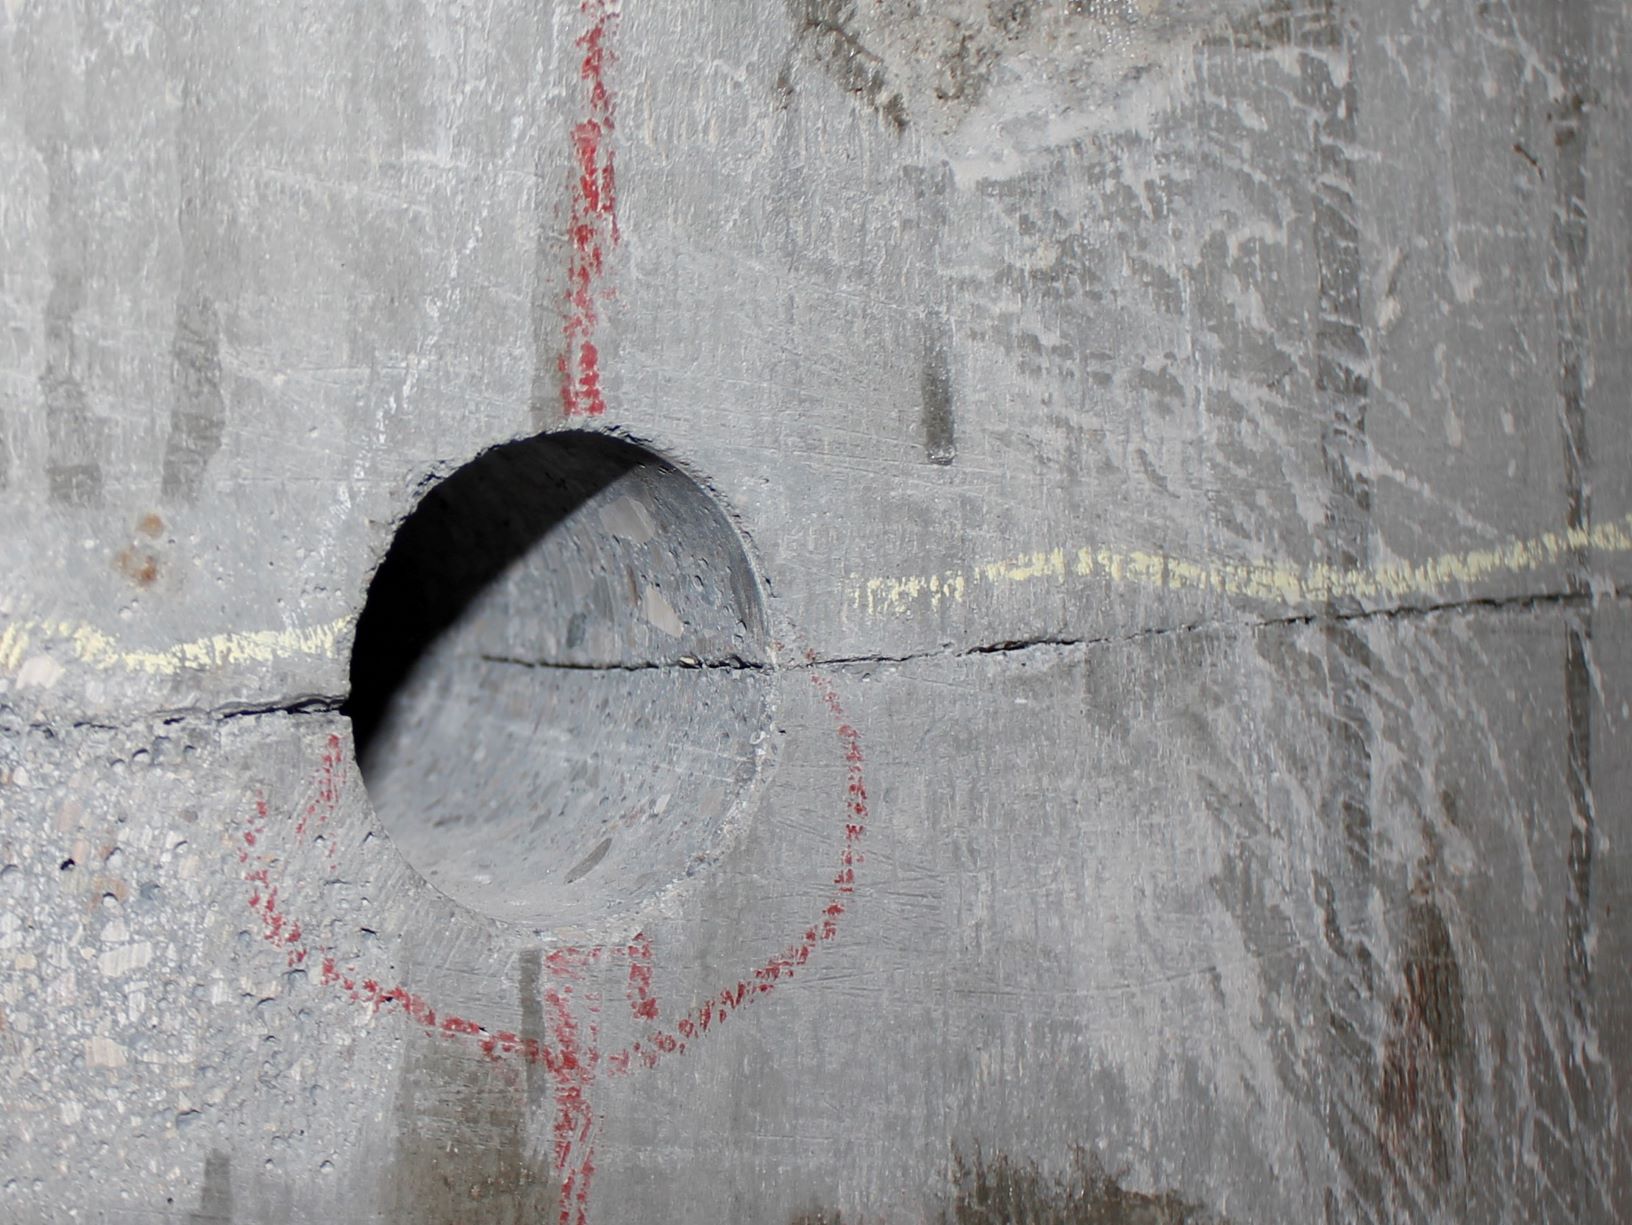 Concrete Crack at Cold Joint - Visual Examination of Coreholes